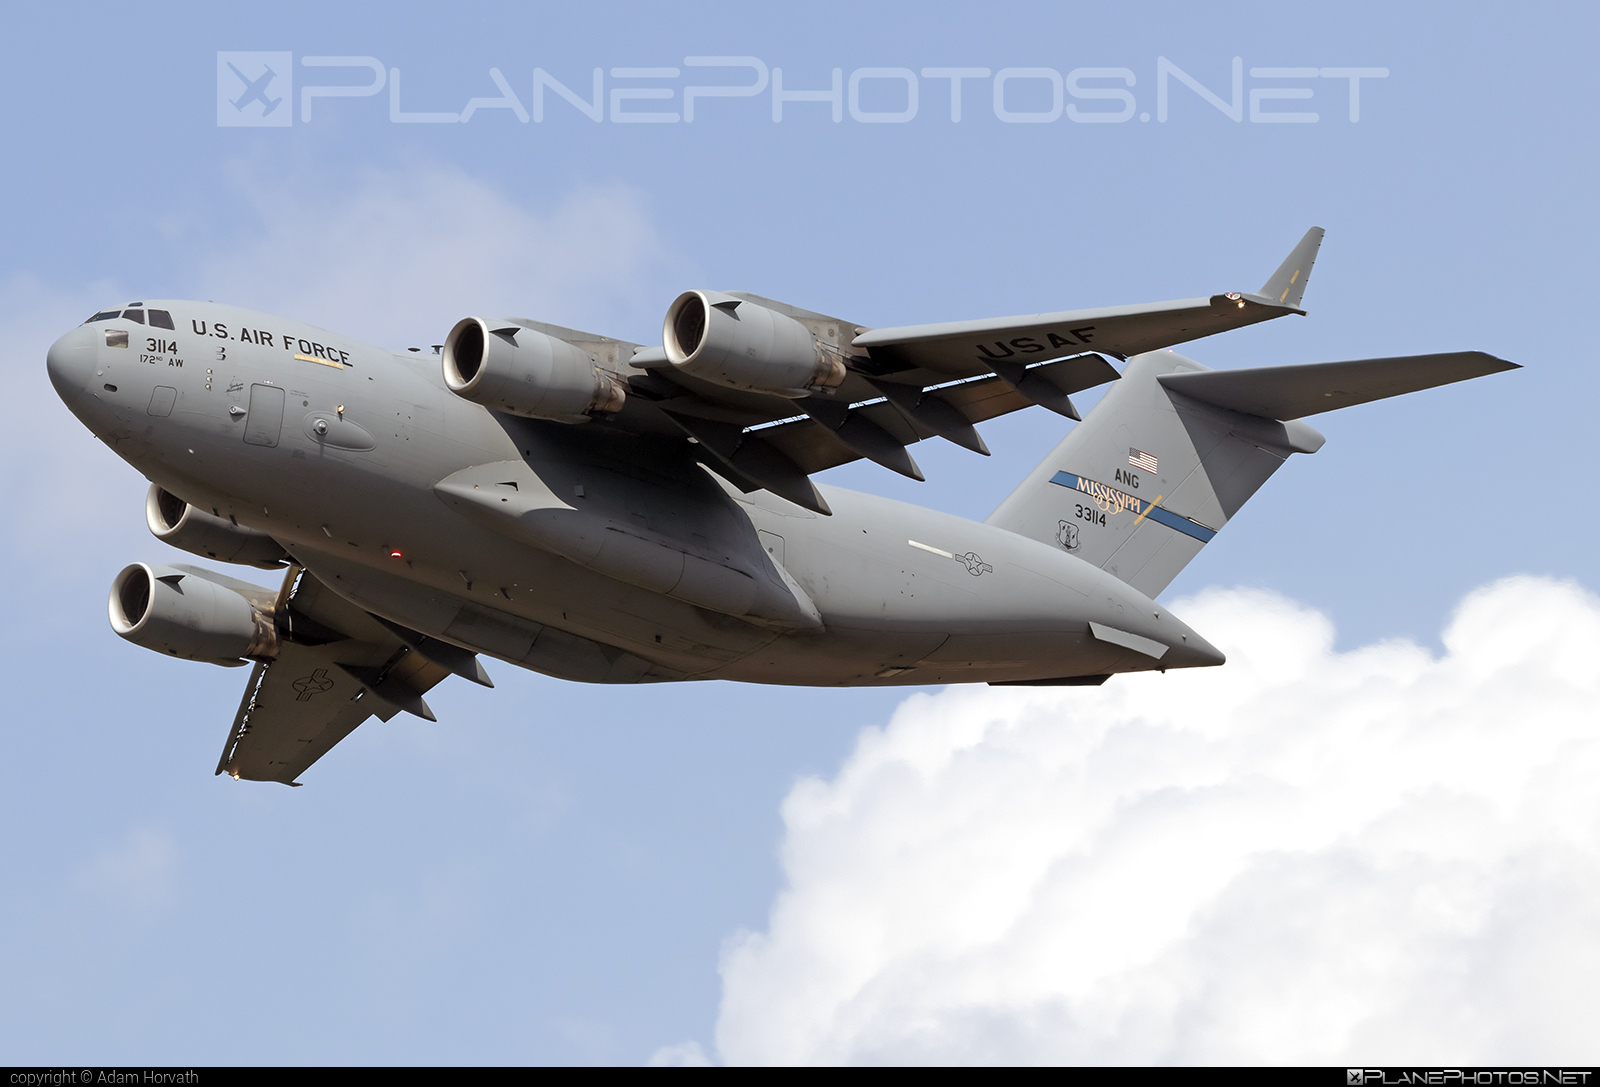 Boeing C-17A Globemaster III - 03-3114 operated by US Air Force (USAF) #boeing #c17 #c17globemaster #globemaster #globemasteriii #usaf #usairforce